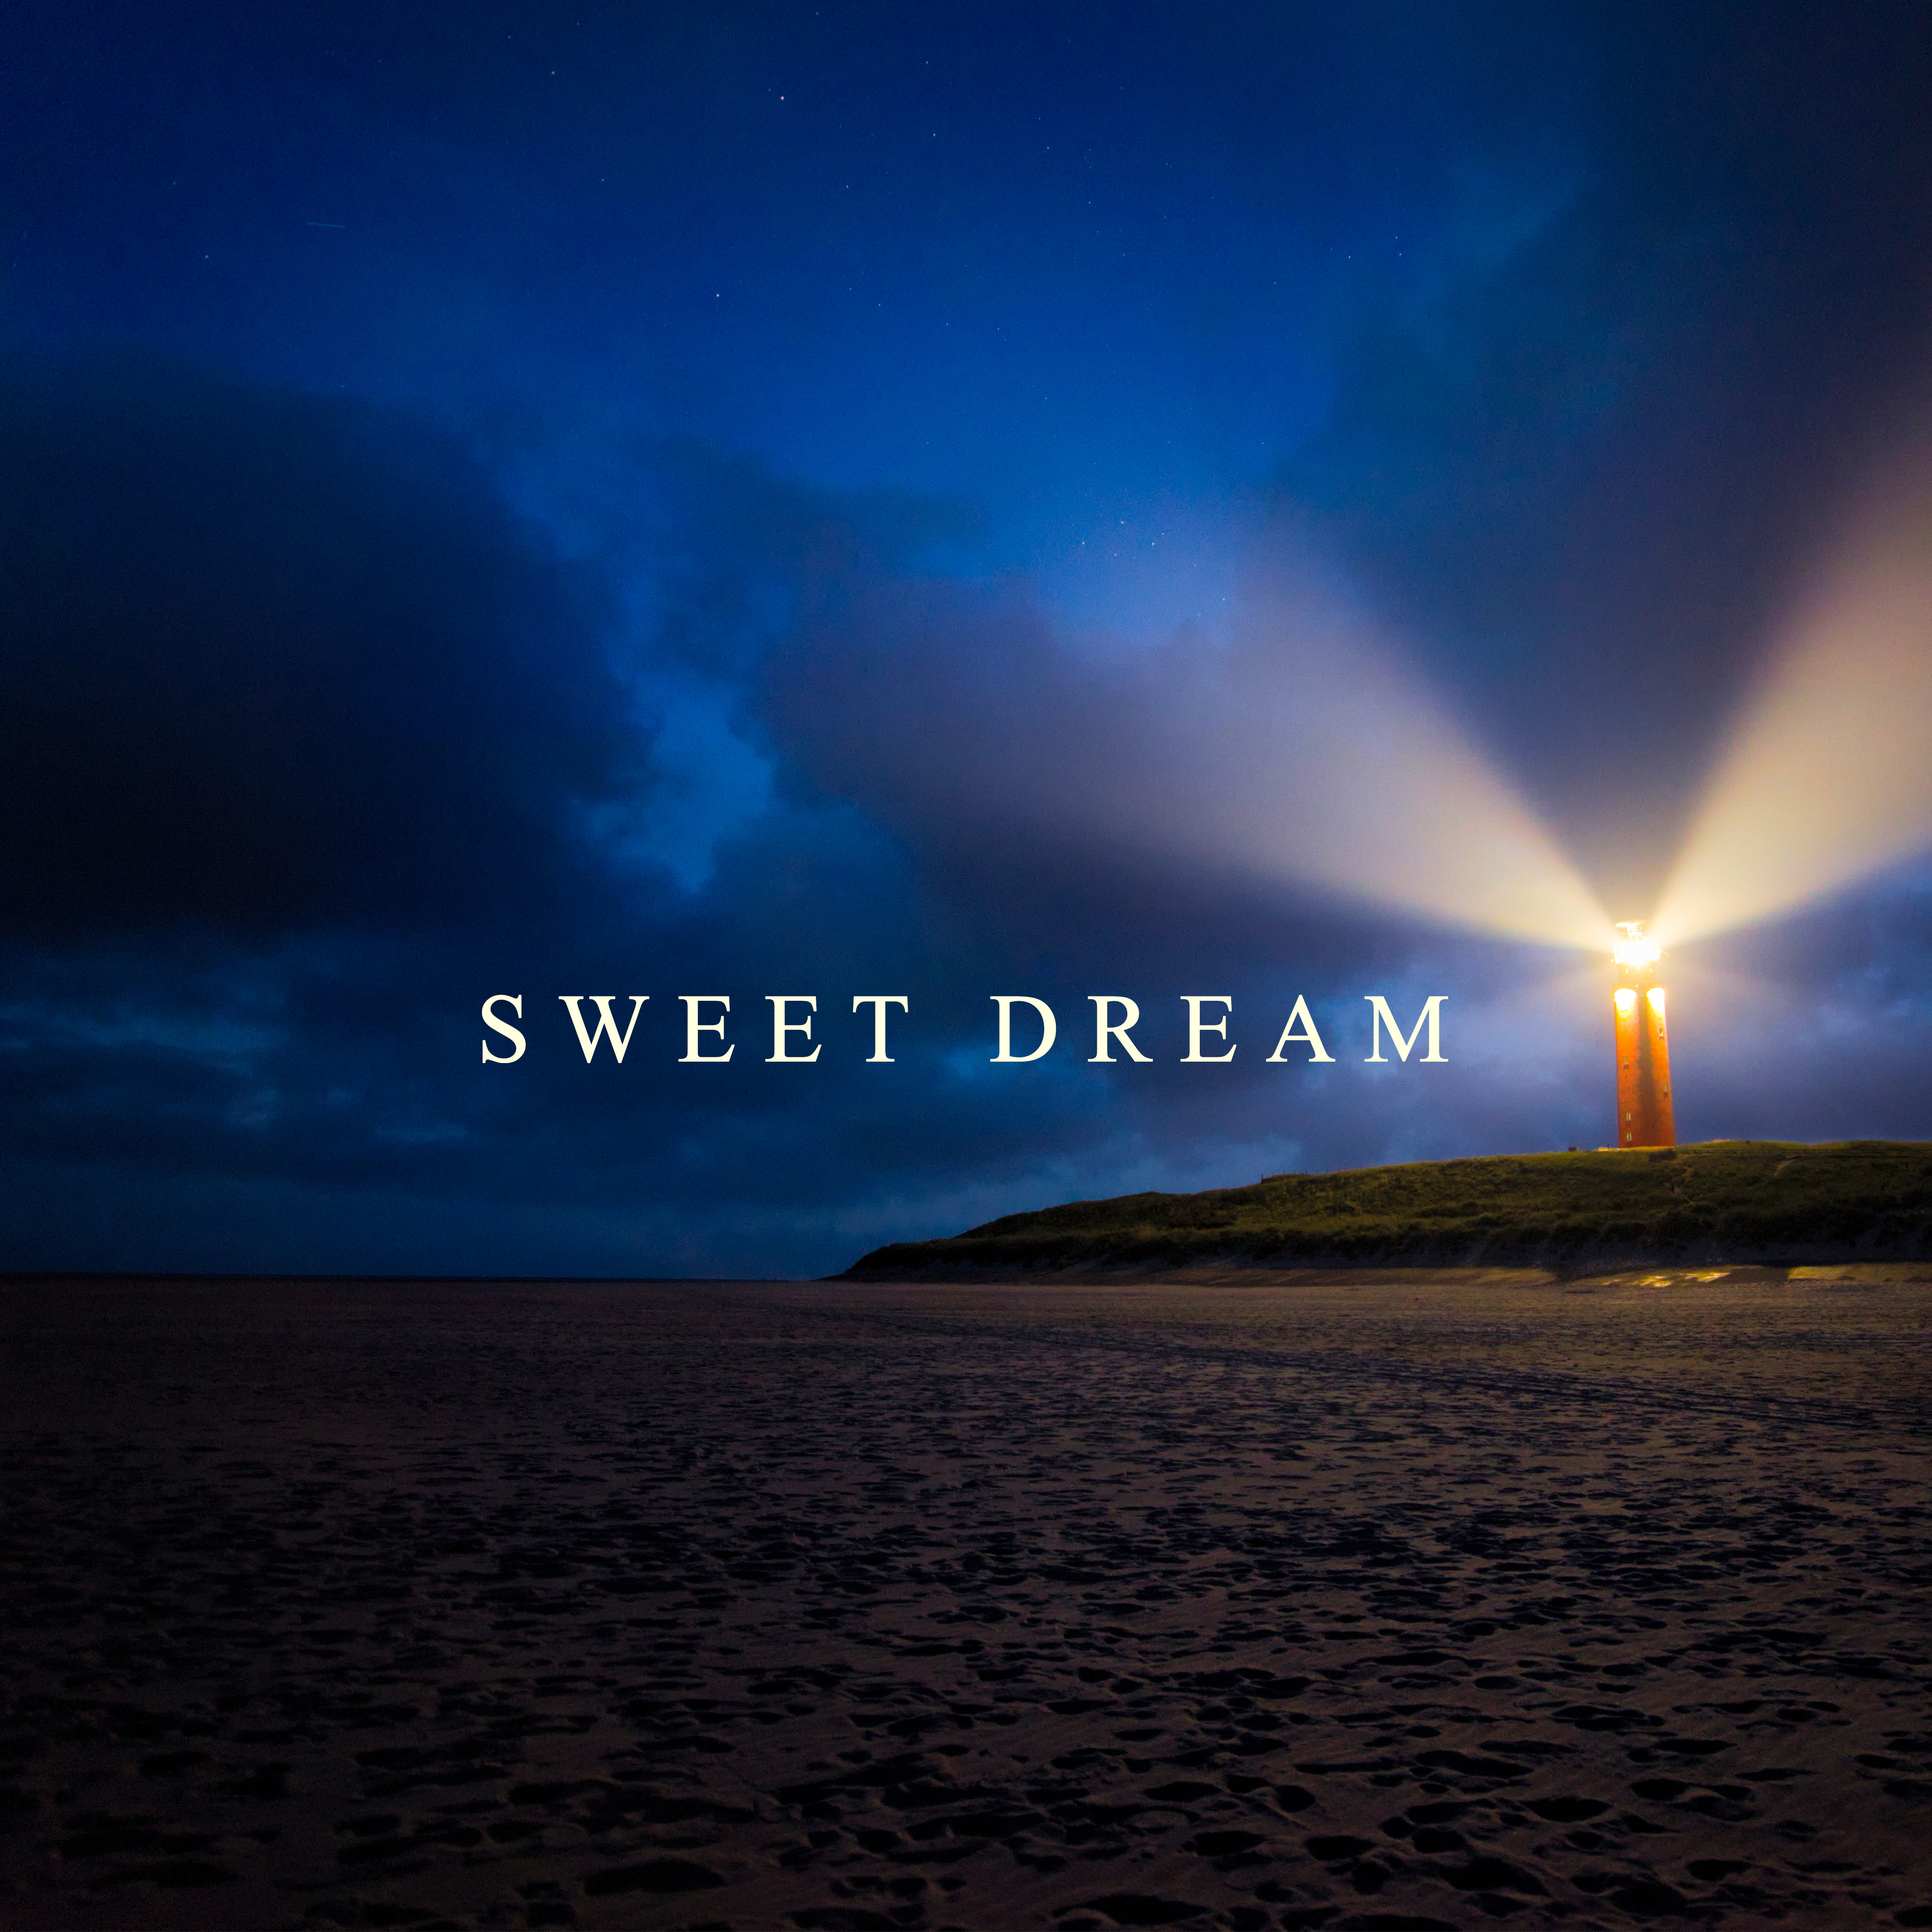 Sweet Dream – Relaxing Therapy at Goodnight, Lullaby, Peaceful Music for Sleep, Calm Nap, Pure Mind